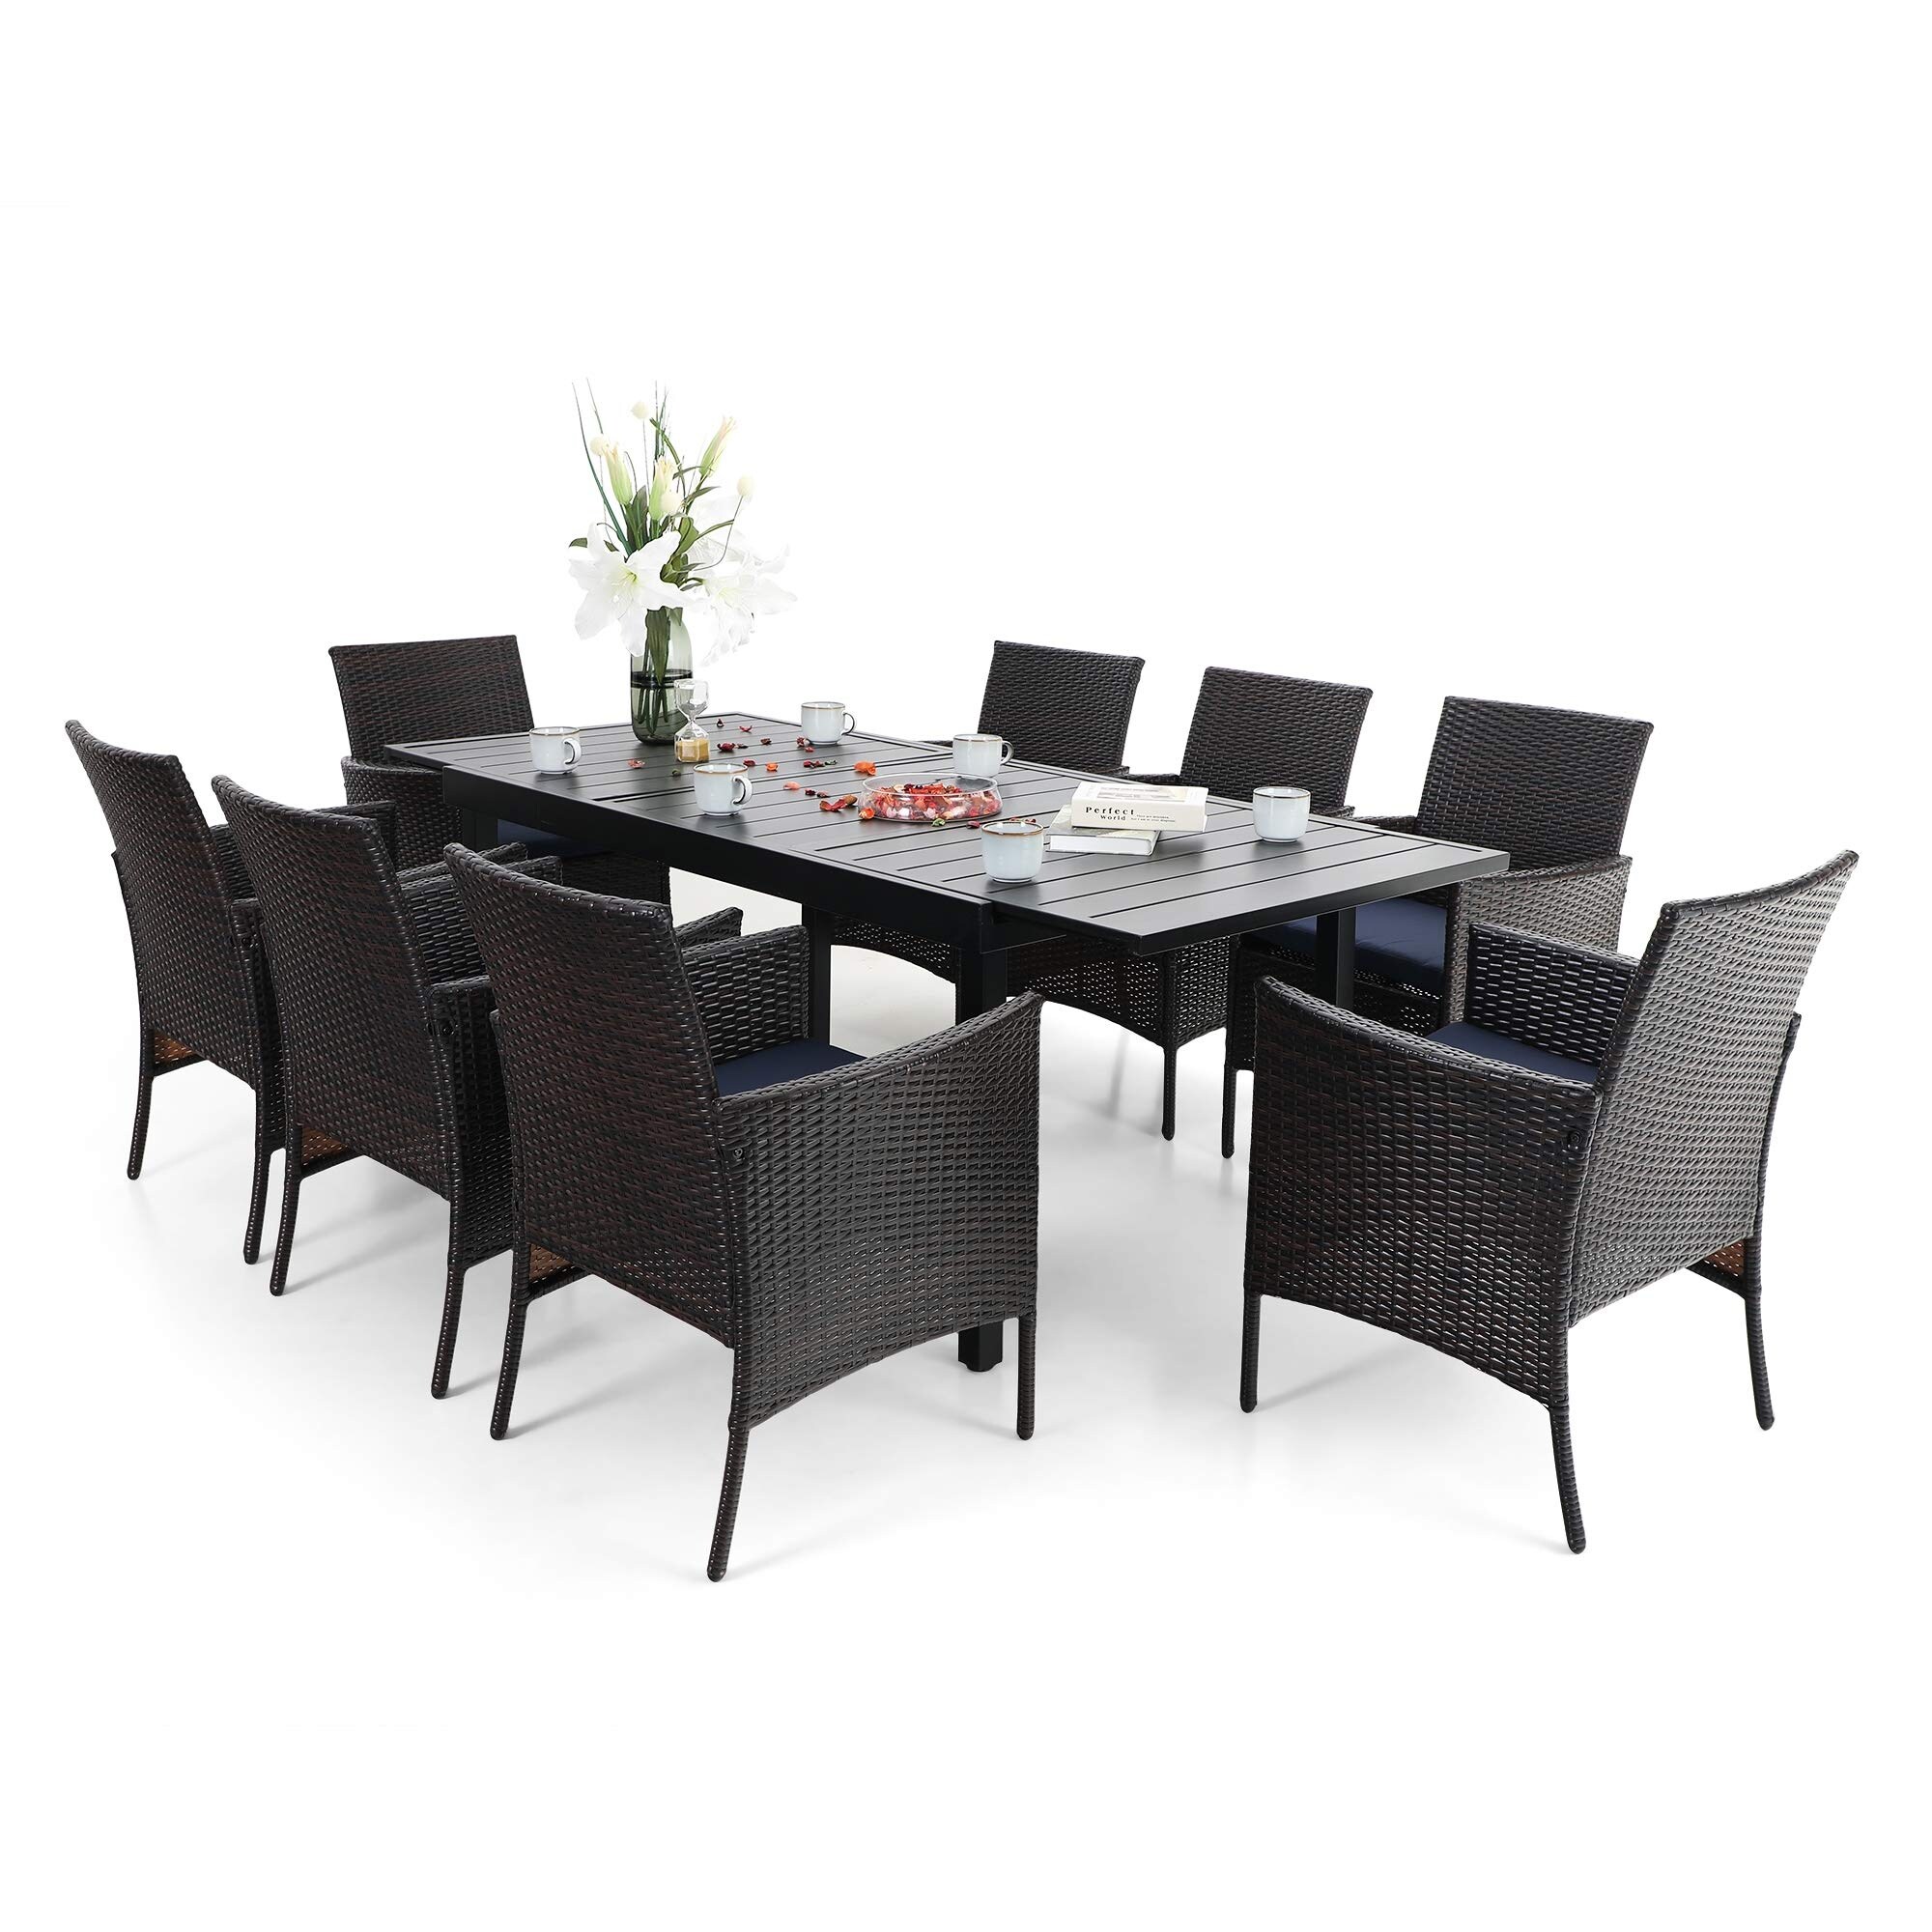 PHI VILLA 7/9 Piece Outdoor Dining Table Sets, Expandable Rectangular Metal  Dining Table and 6 Rattan Chairs